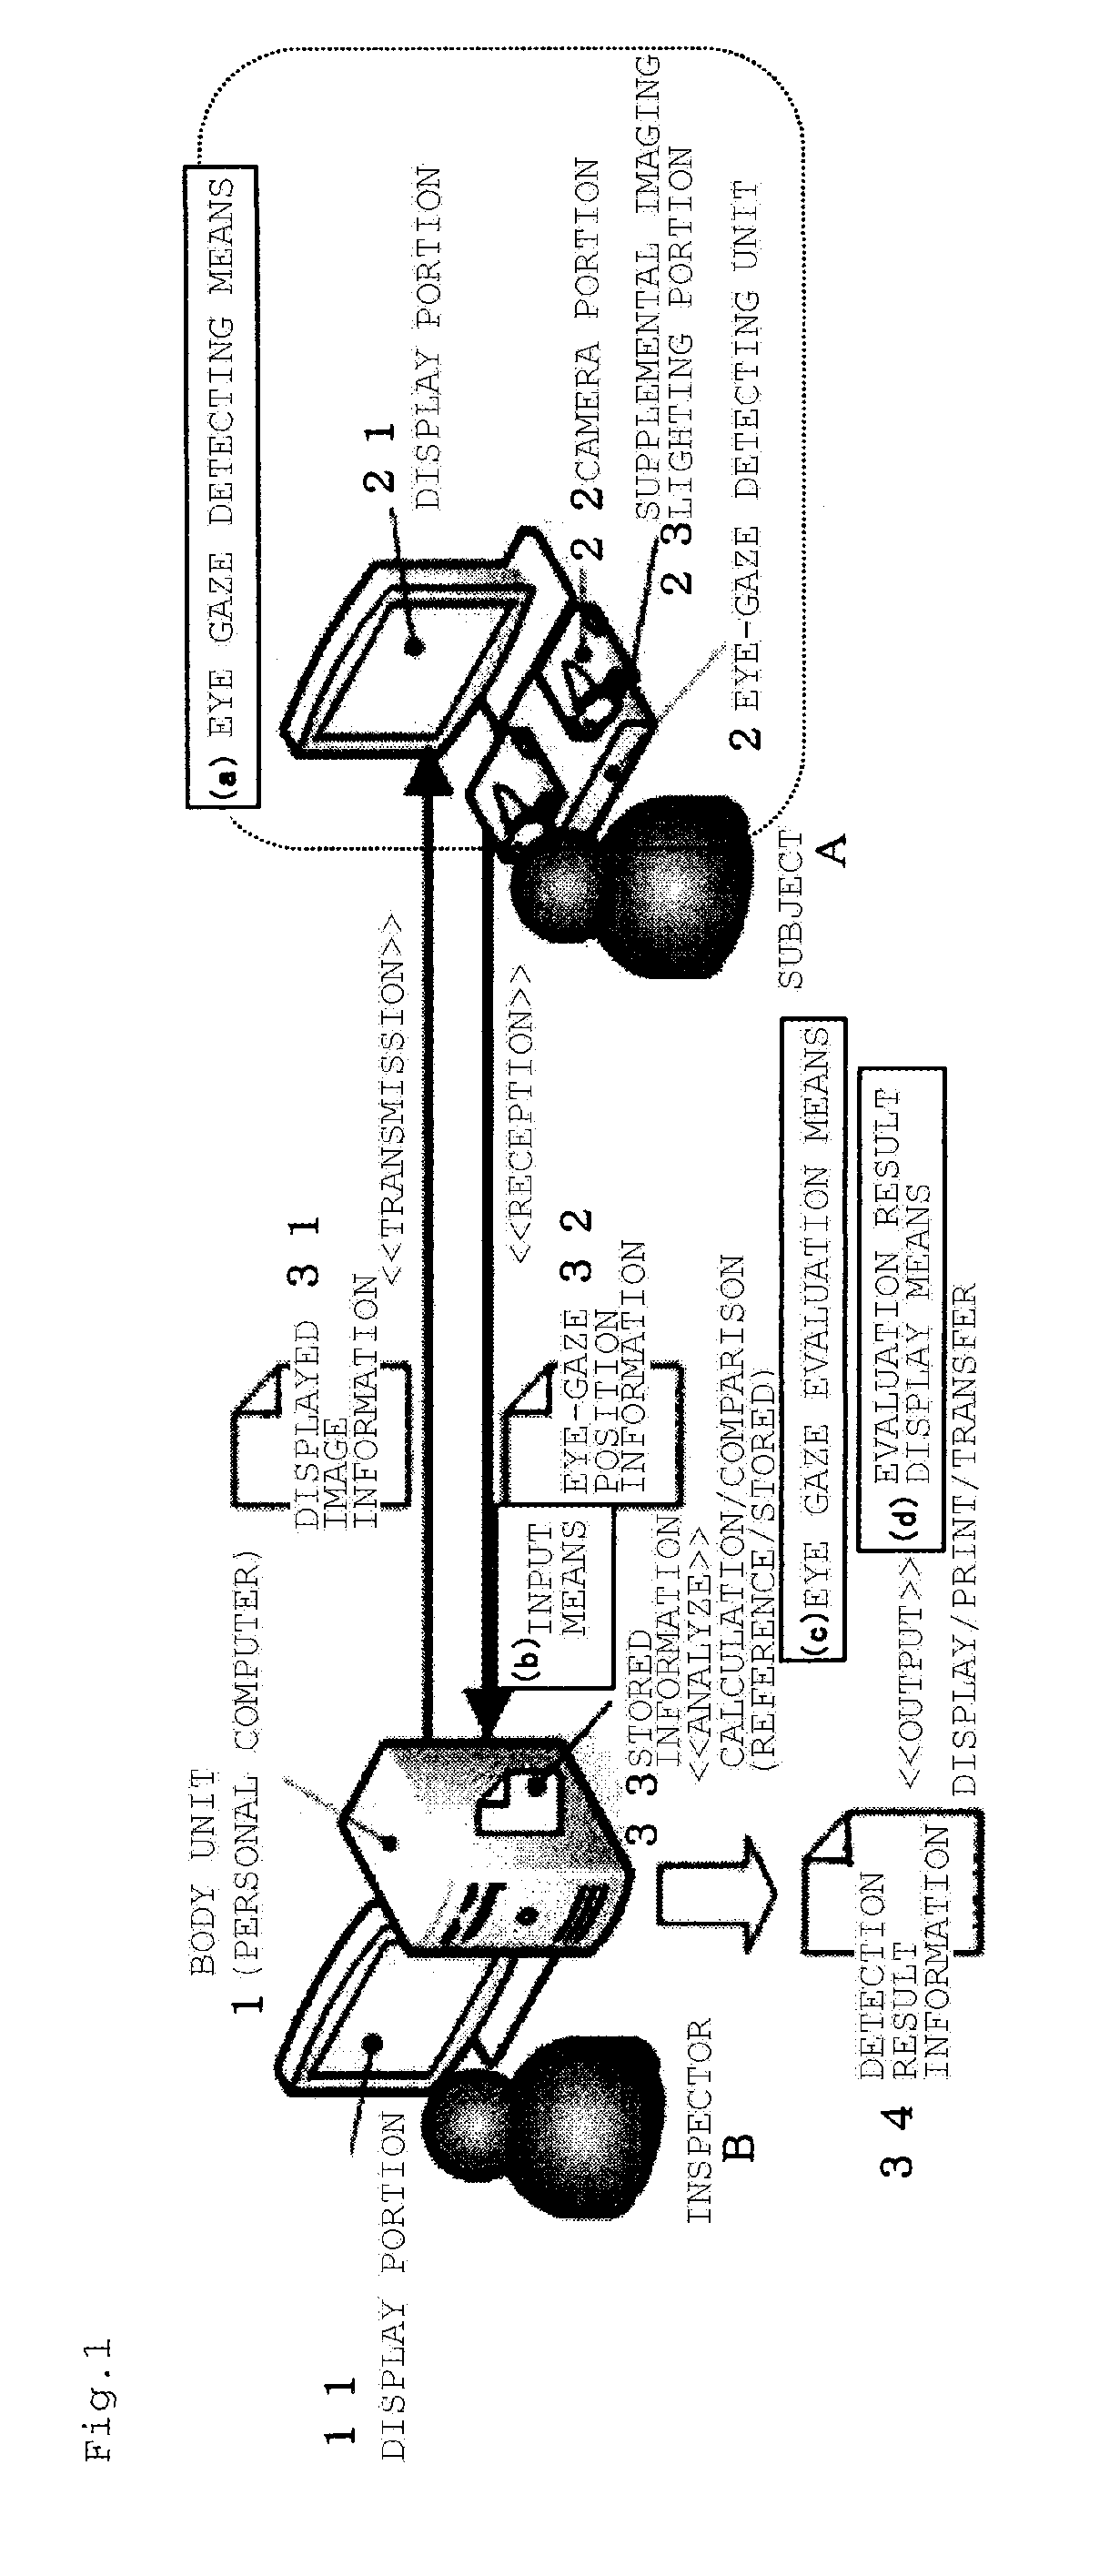 Autism diagnosis support method and system, and autism diagnosis support device